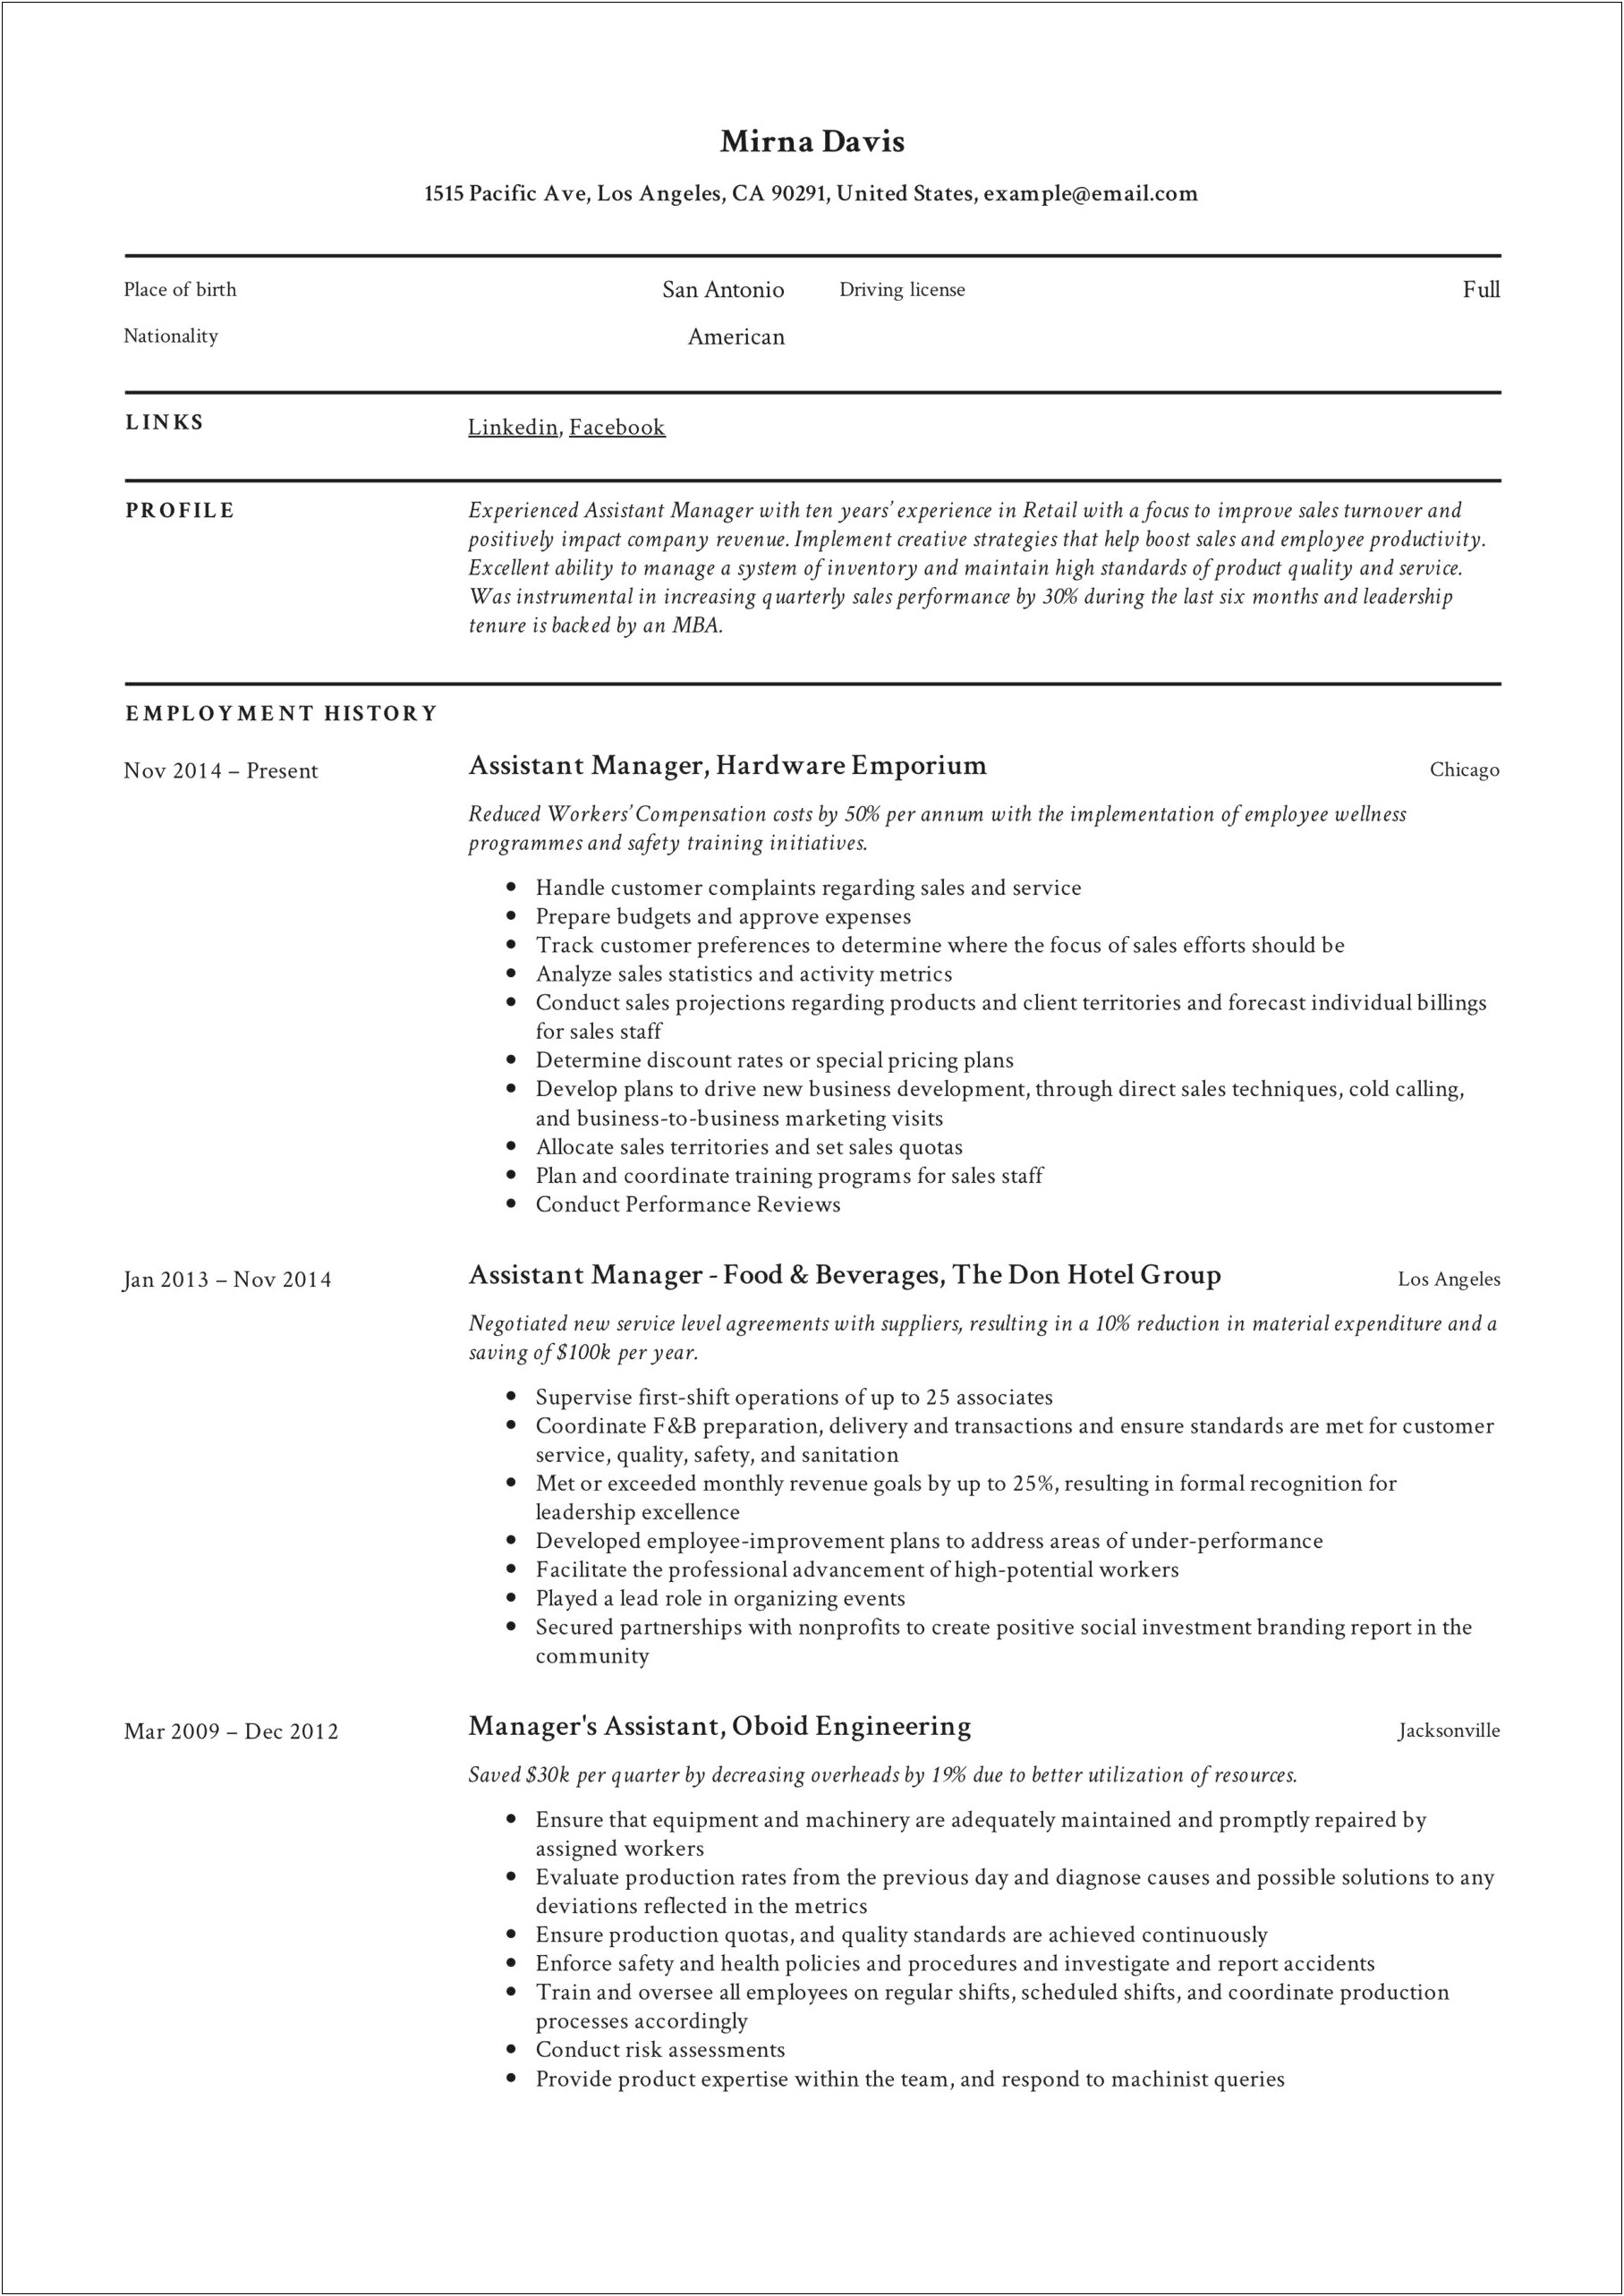 Free Resume For Retail Store Manager